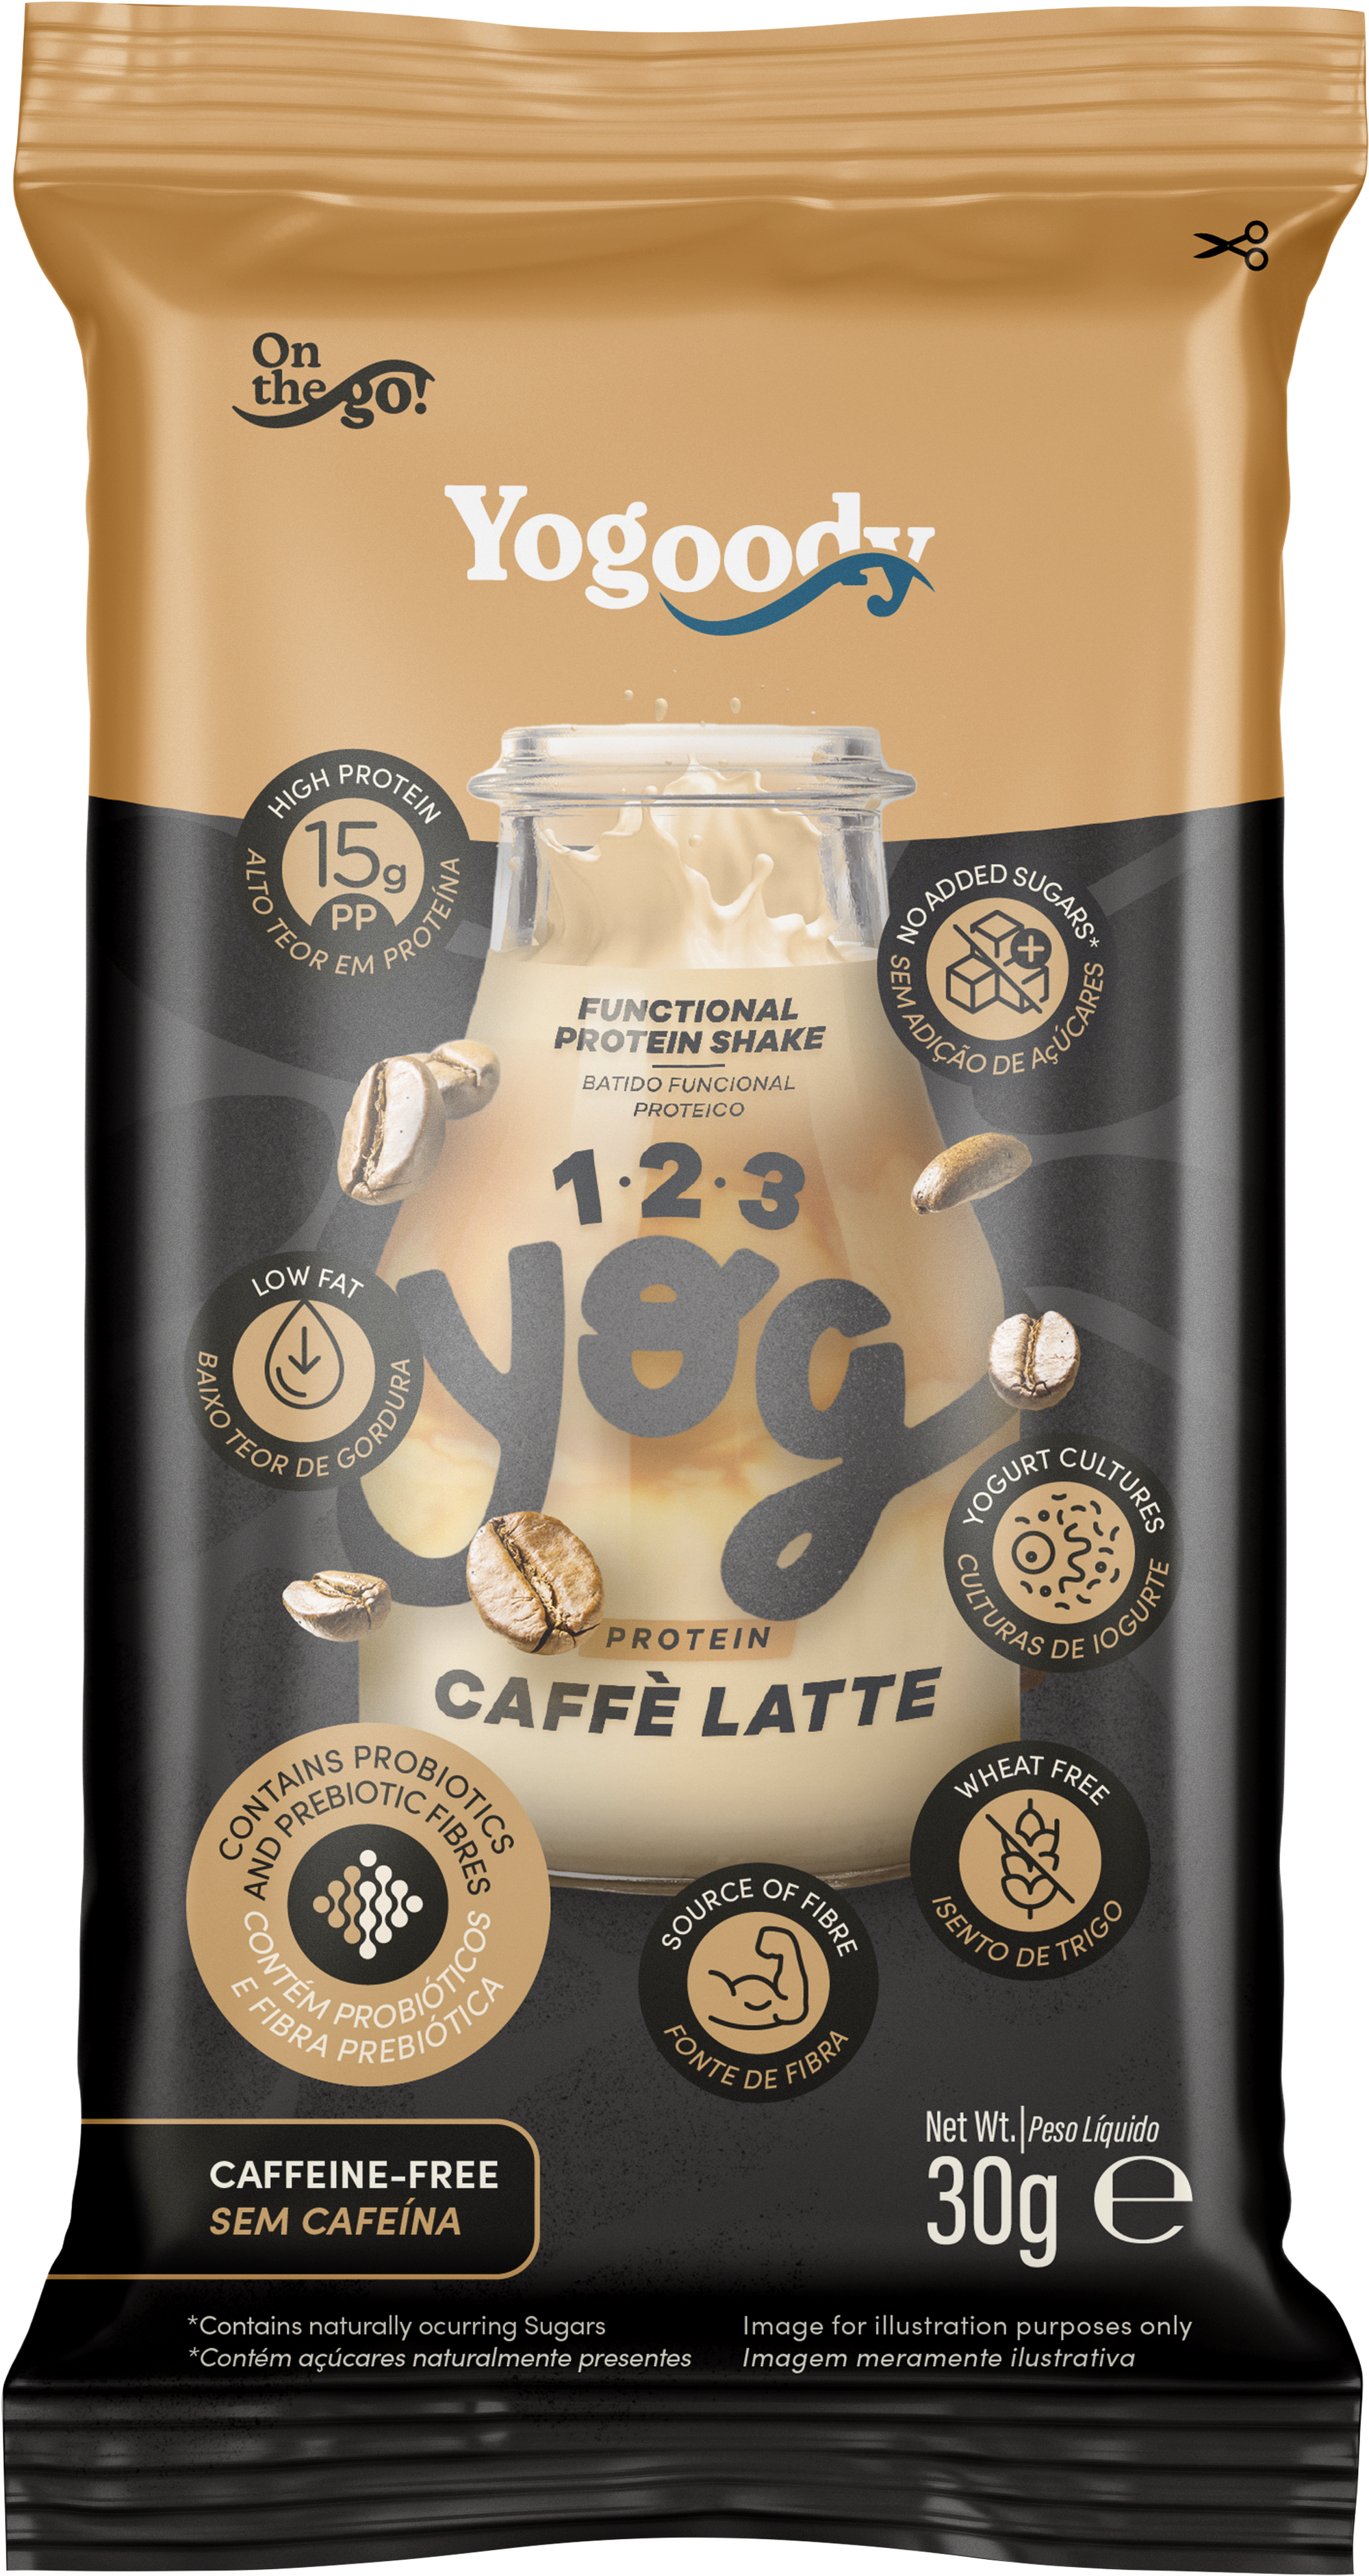 Welcome Pack - 1.2.3. YOG Protein Banana and Caffe Latte (10 x 30g sachets + FREE shaker)